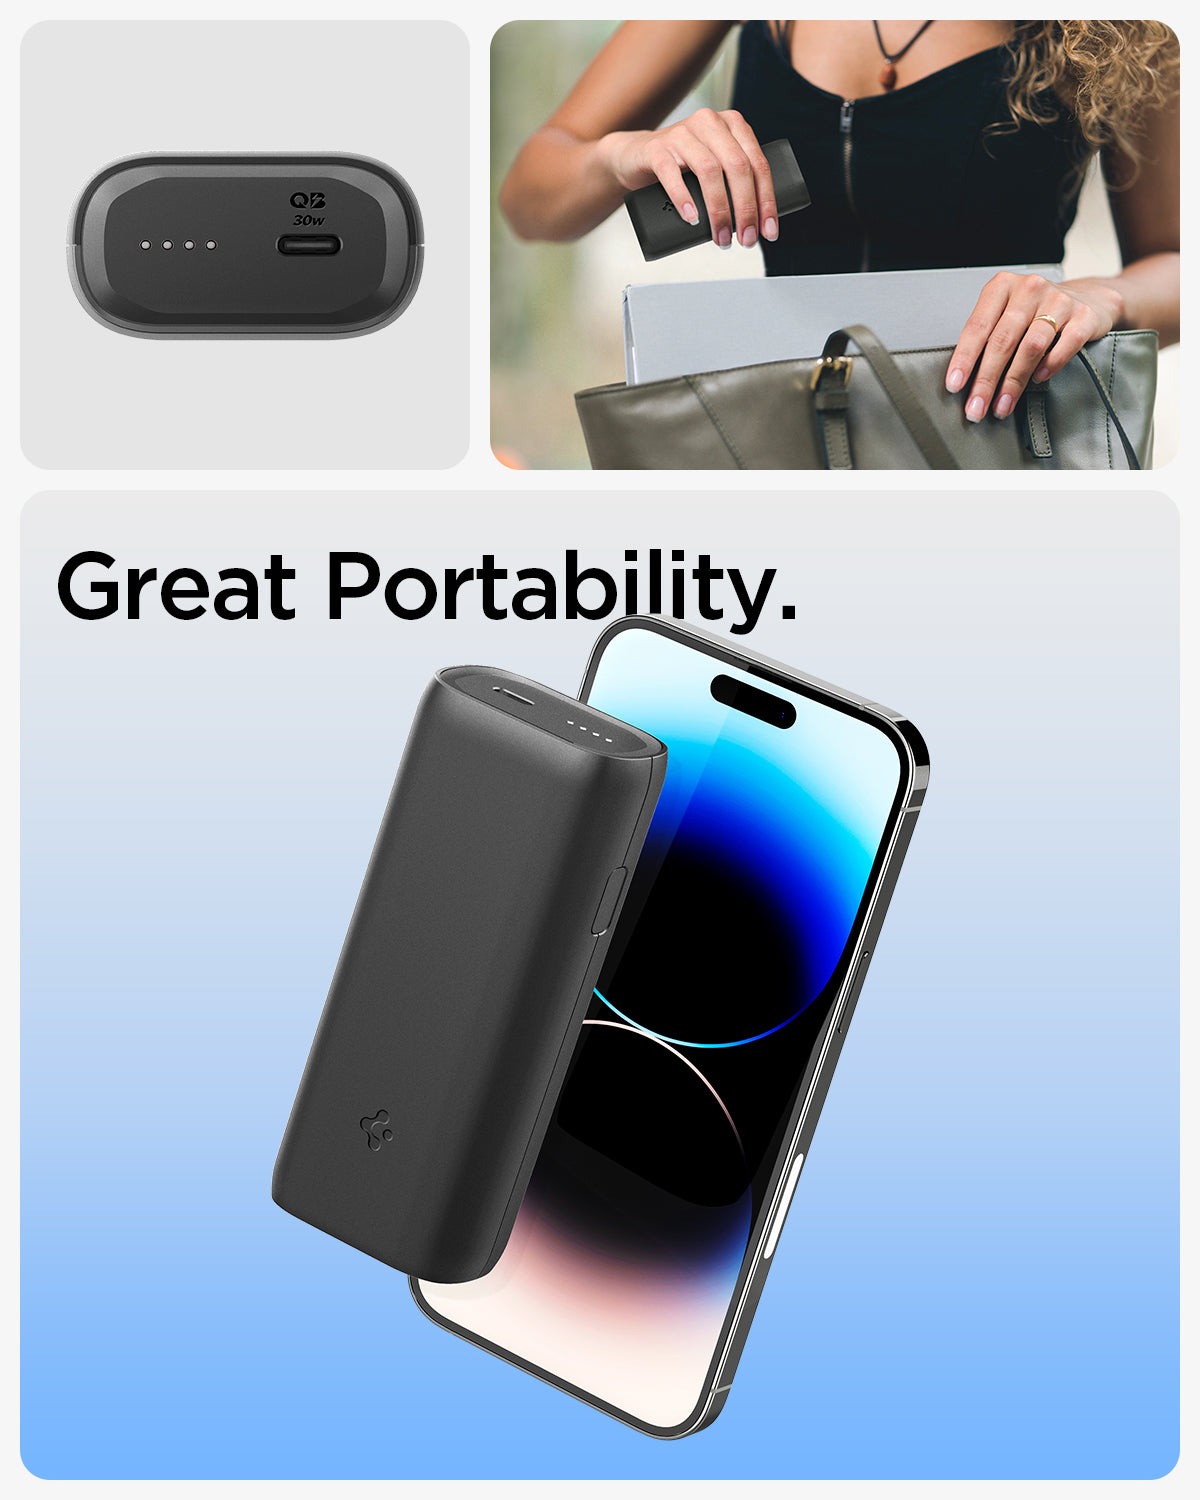 ABA04268 - ArcPack™ Portable Charger PA2100 in Black showing the Great Portability. A woman putting a charger unto her bag and a portable charger smaller that an iPhone hovering in front of a device